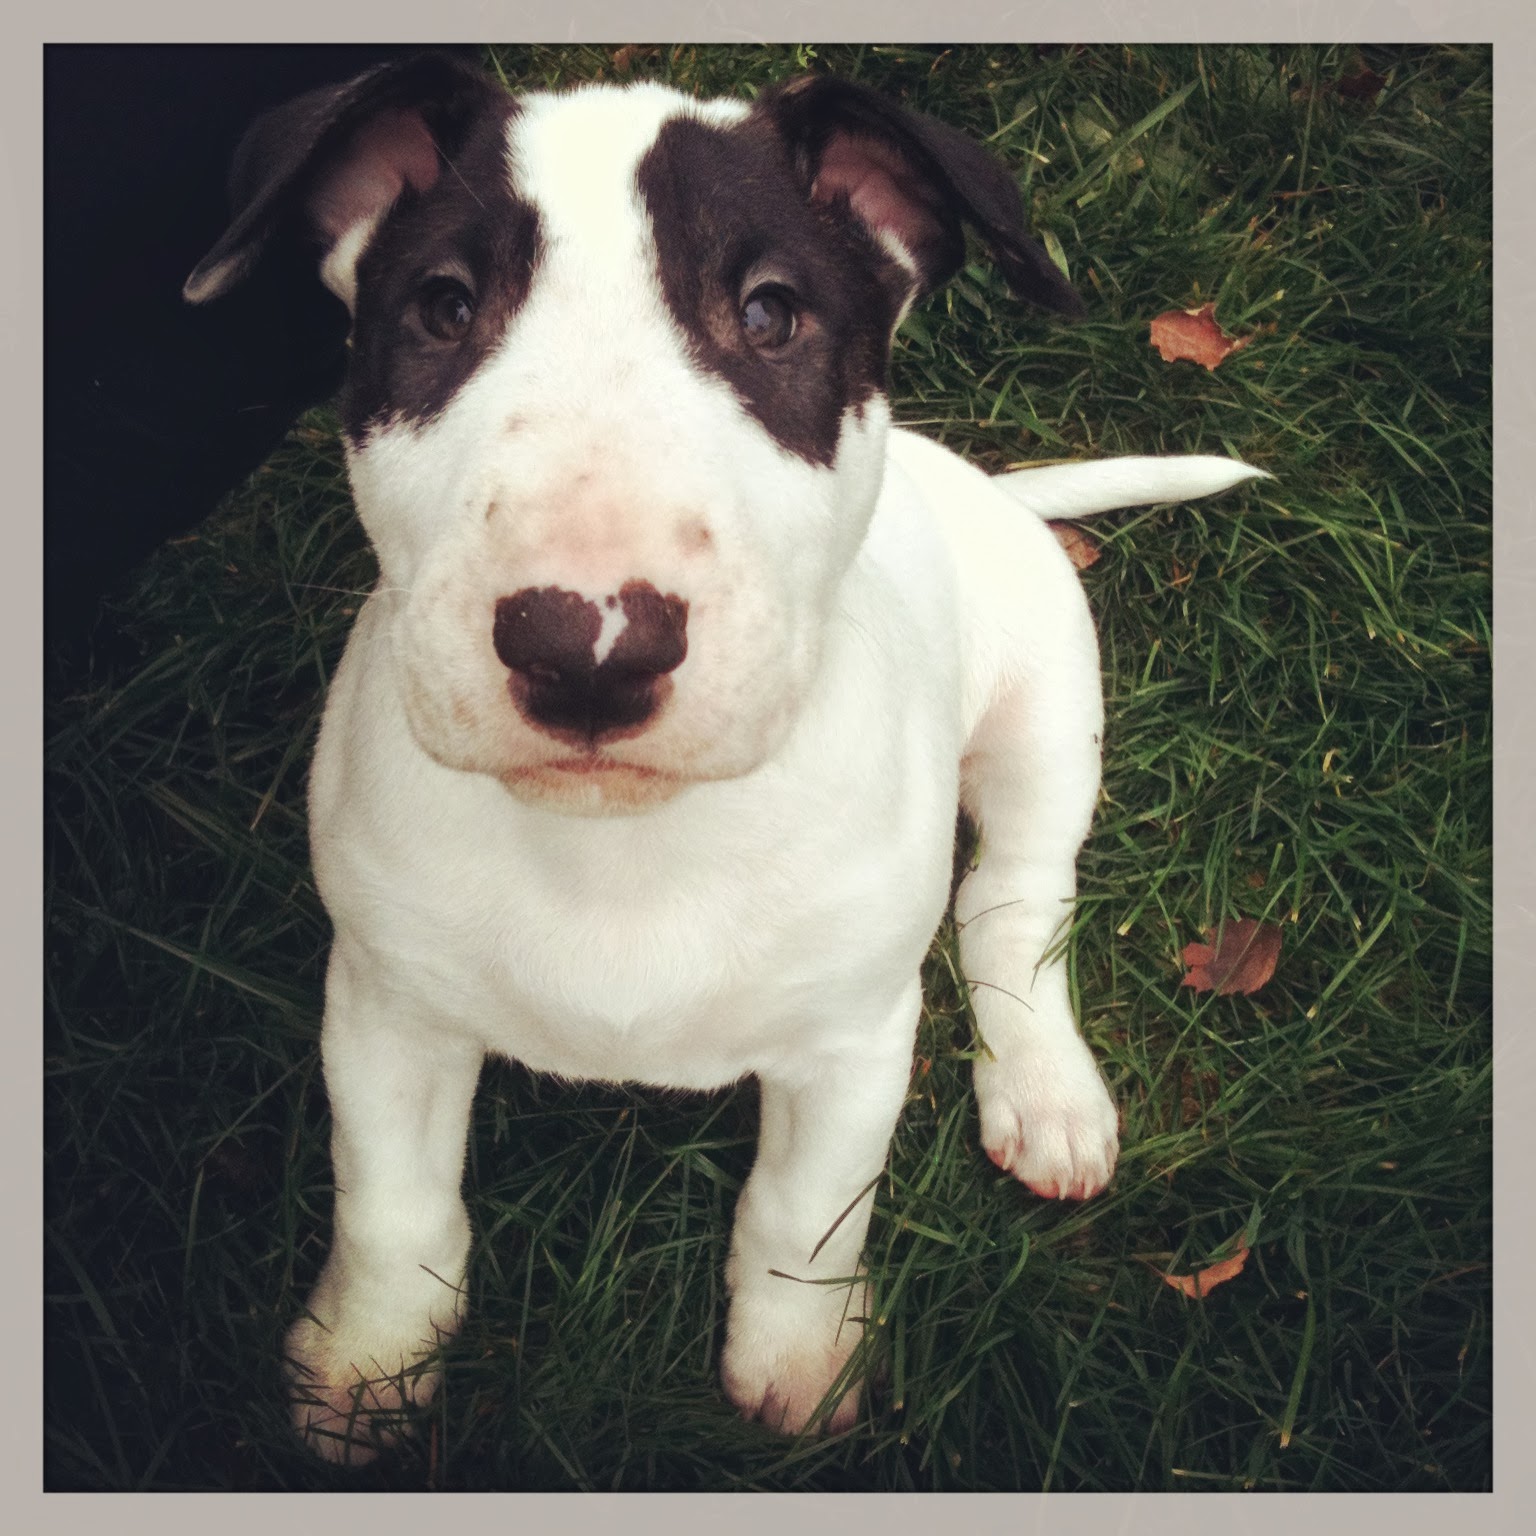 up bull terrier english ears stand Terrier English a is Bull He purebred